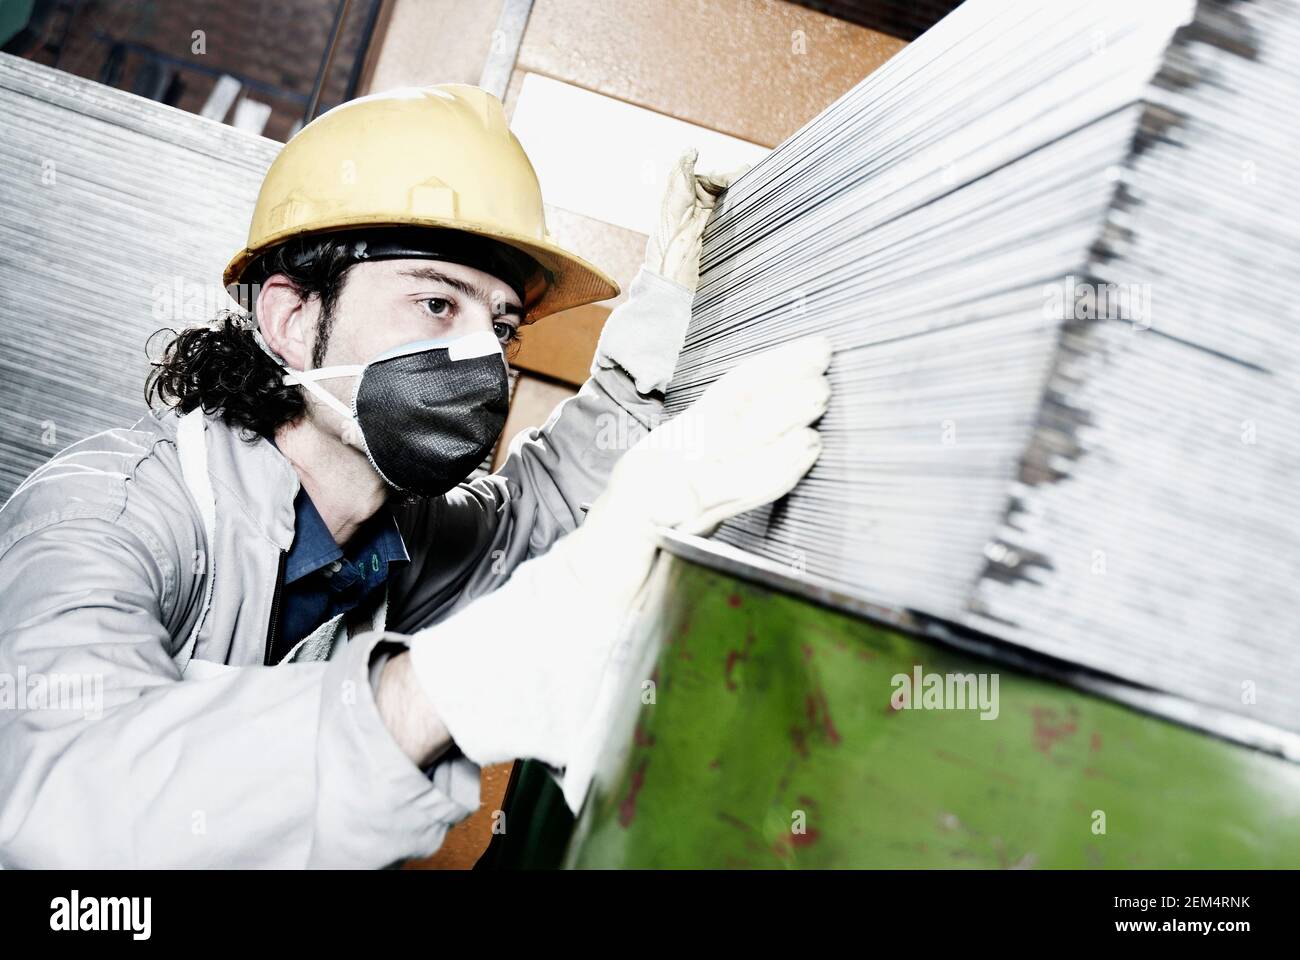 Close-up of a mid adult man wearing a hardhat and working in a factory Stock Photo